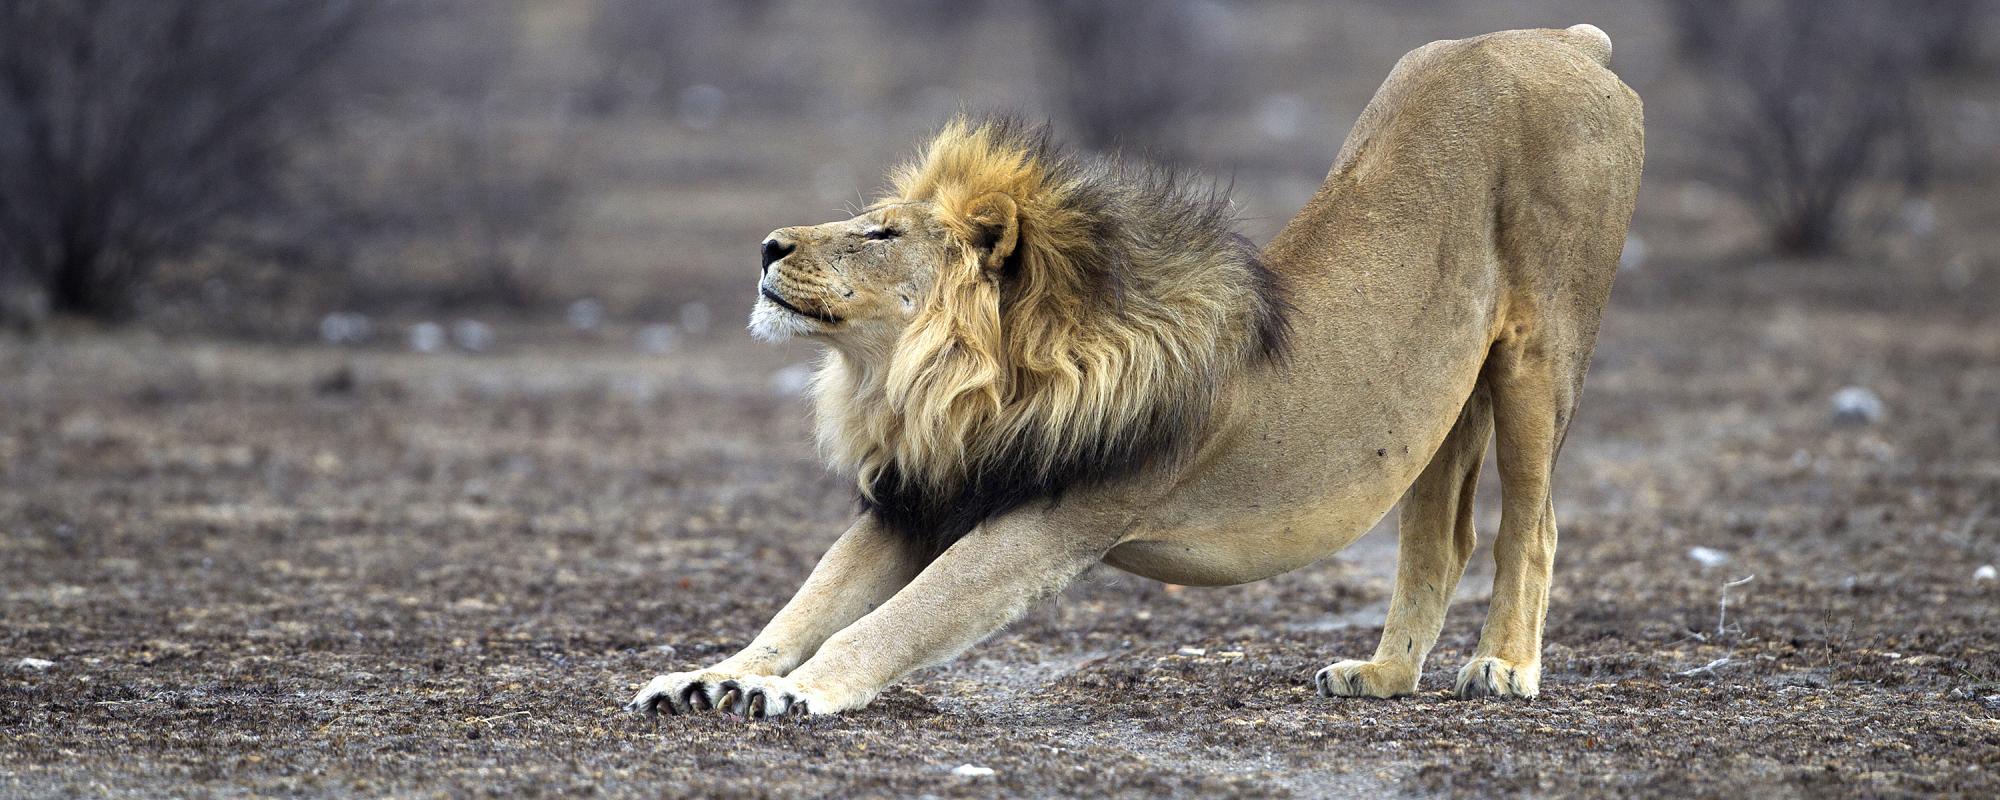 African lion stretching